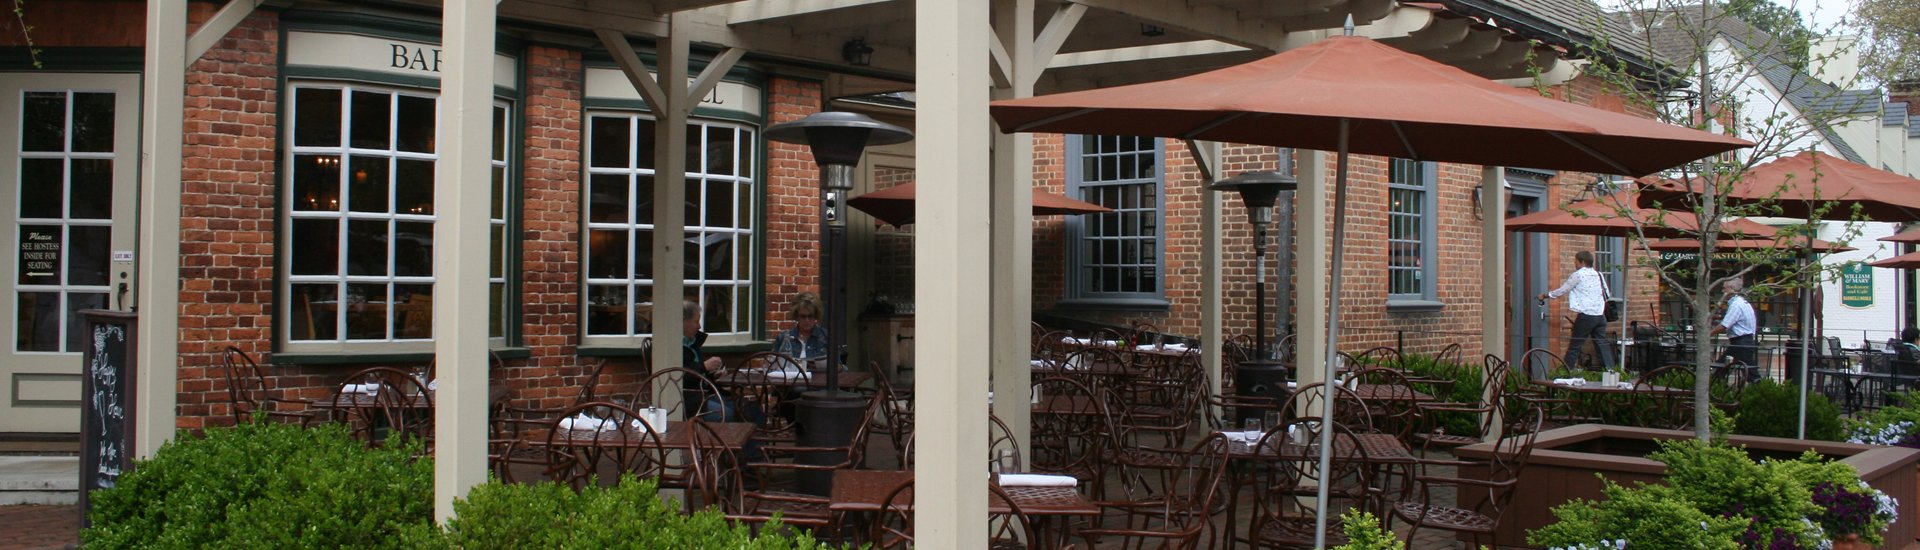 Black Iron Bistro tables outside in front of red brick building with white trim.